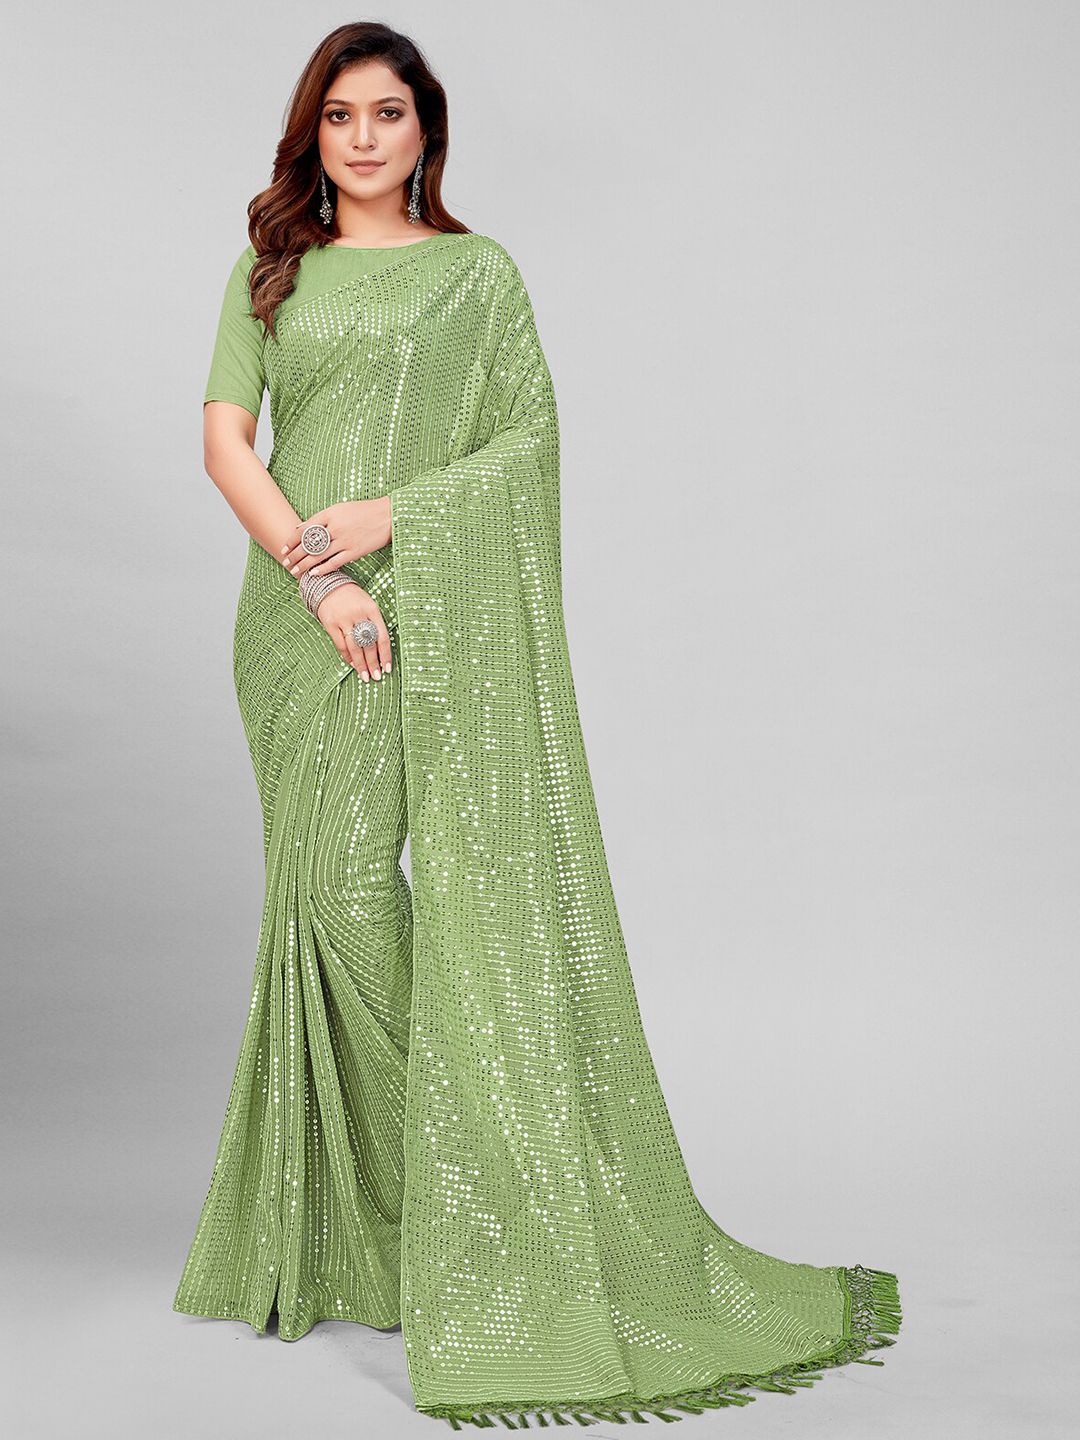 Pratham Blue Fluorescent Green Embellished Sequinned Pure Georgette Saree Price in India